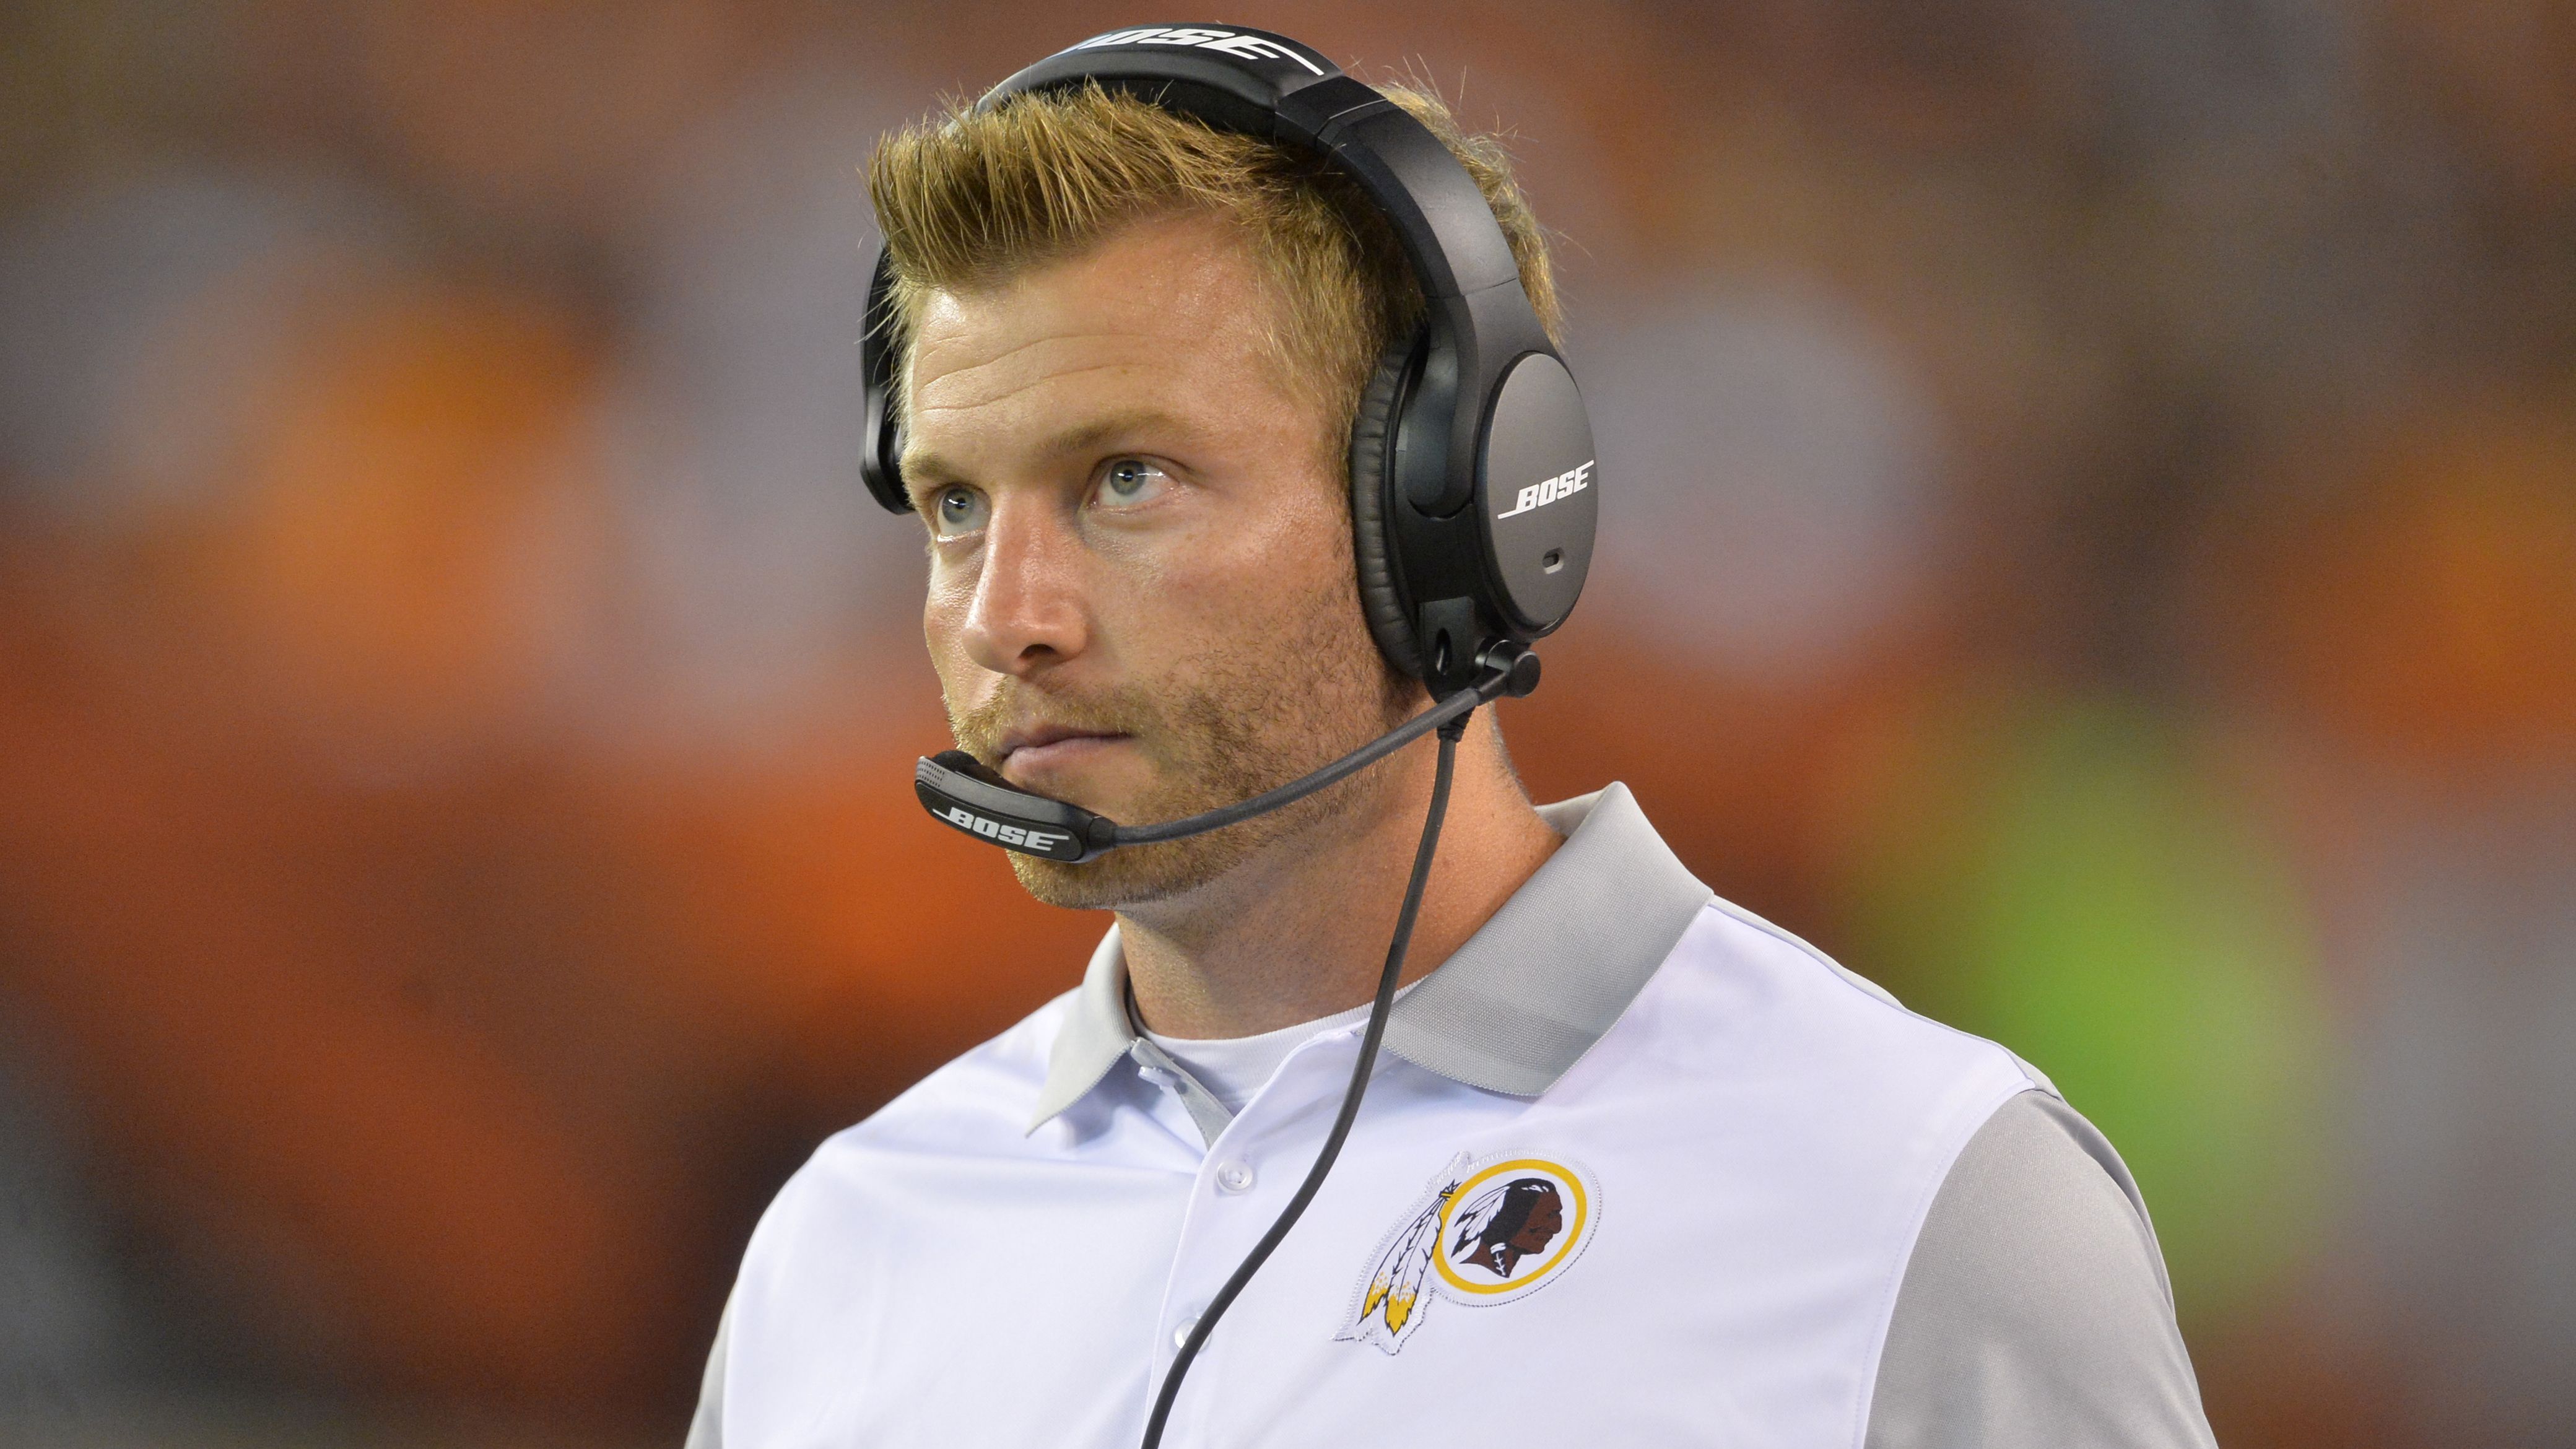 Sean McVay: The youngest head coach in NFL history | CNN